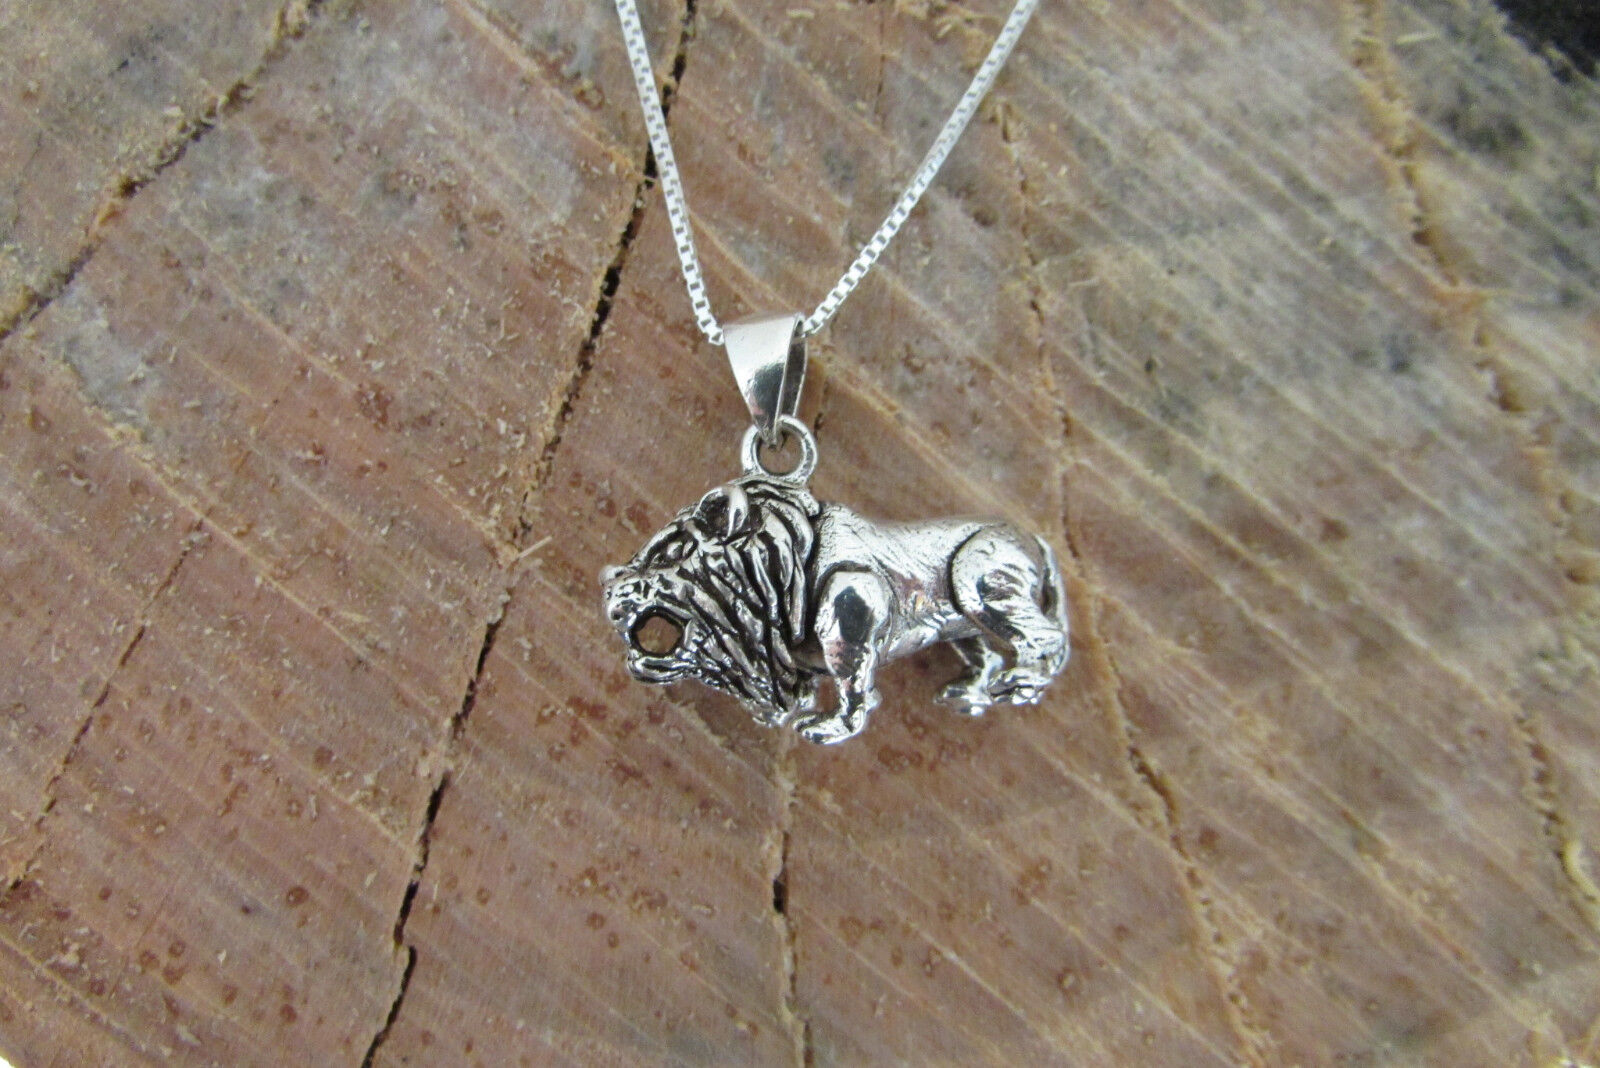 Heavy Lion Necklace Sterling Silver Pendant Stunning 925 Charm Jewelry and Chain